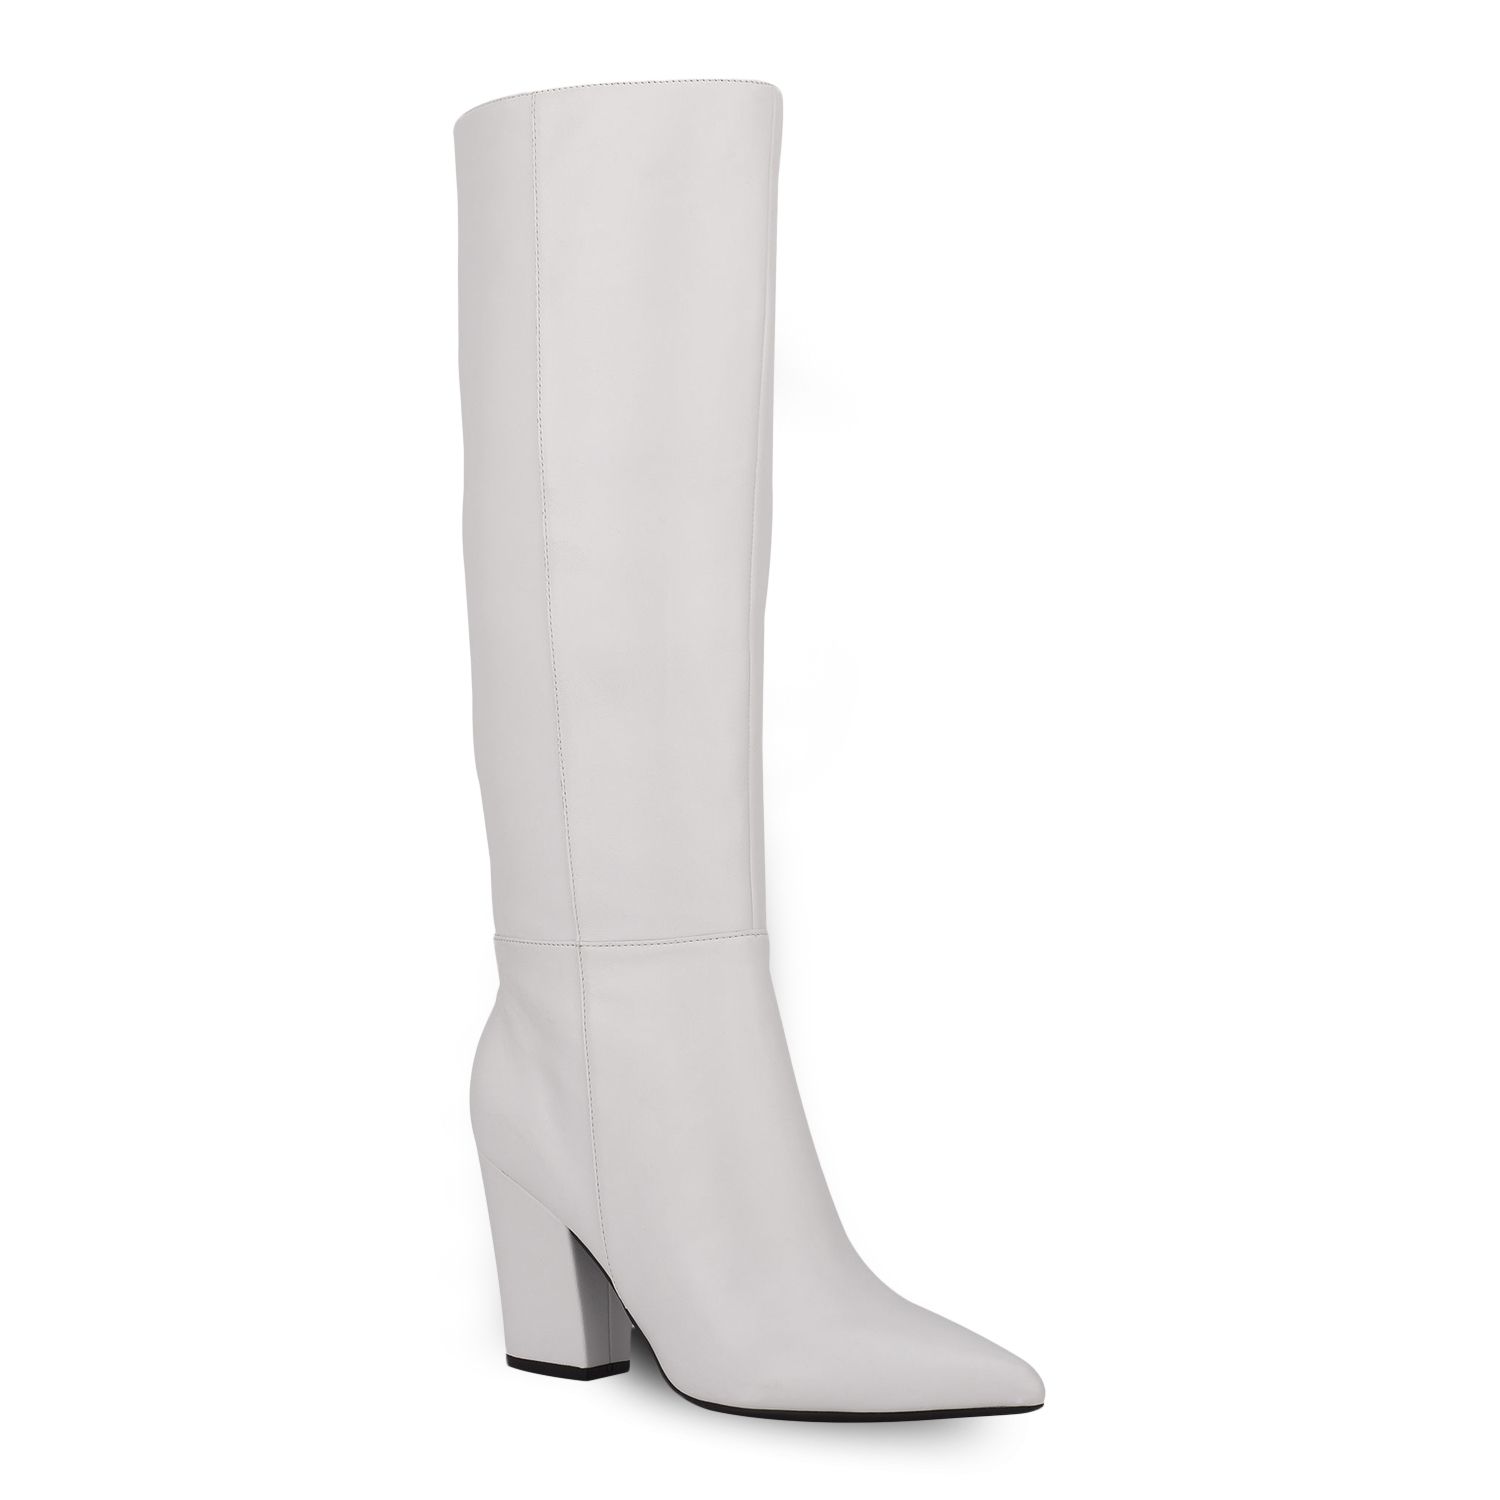 Womens White Dress Boots - Shoes | Kohl's